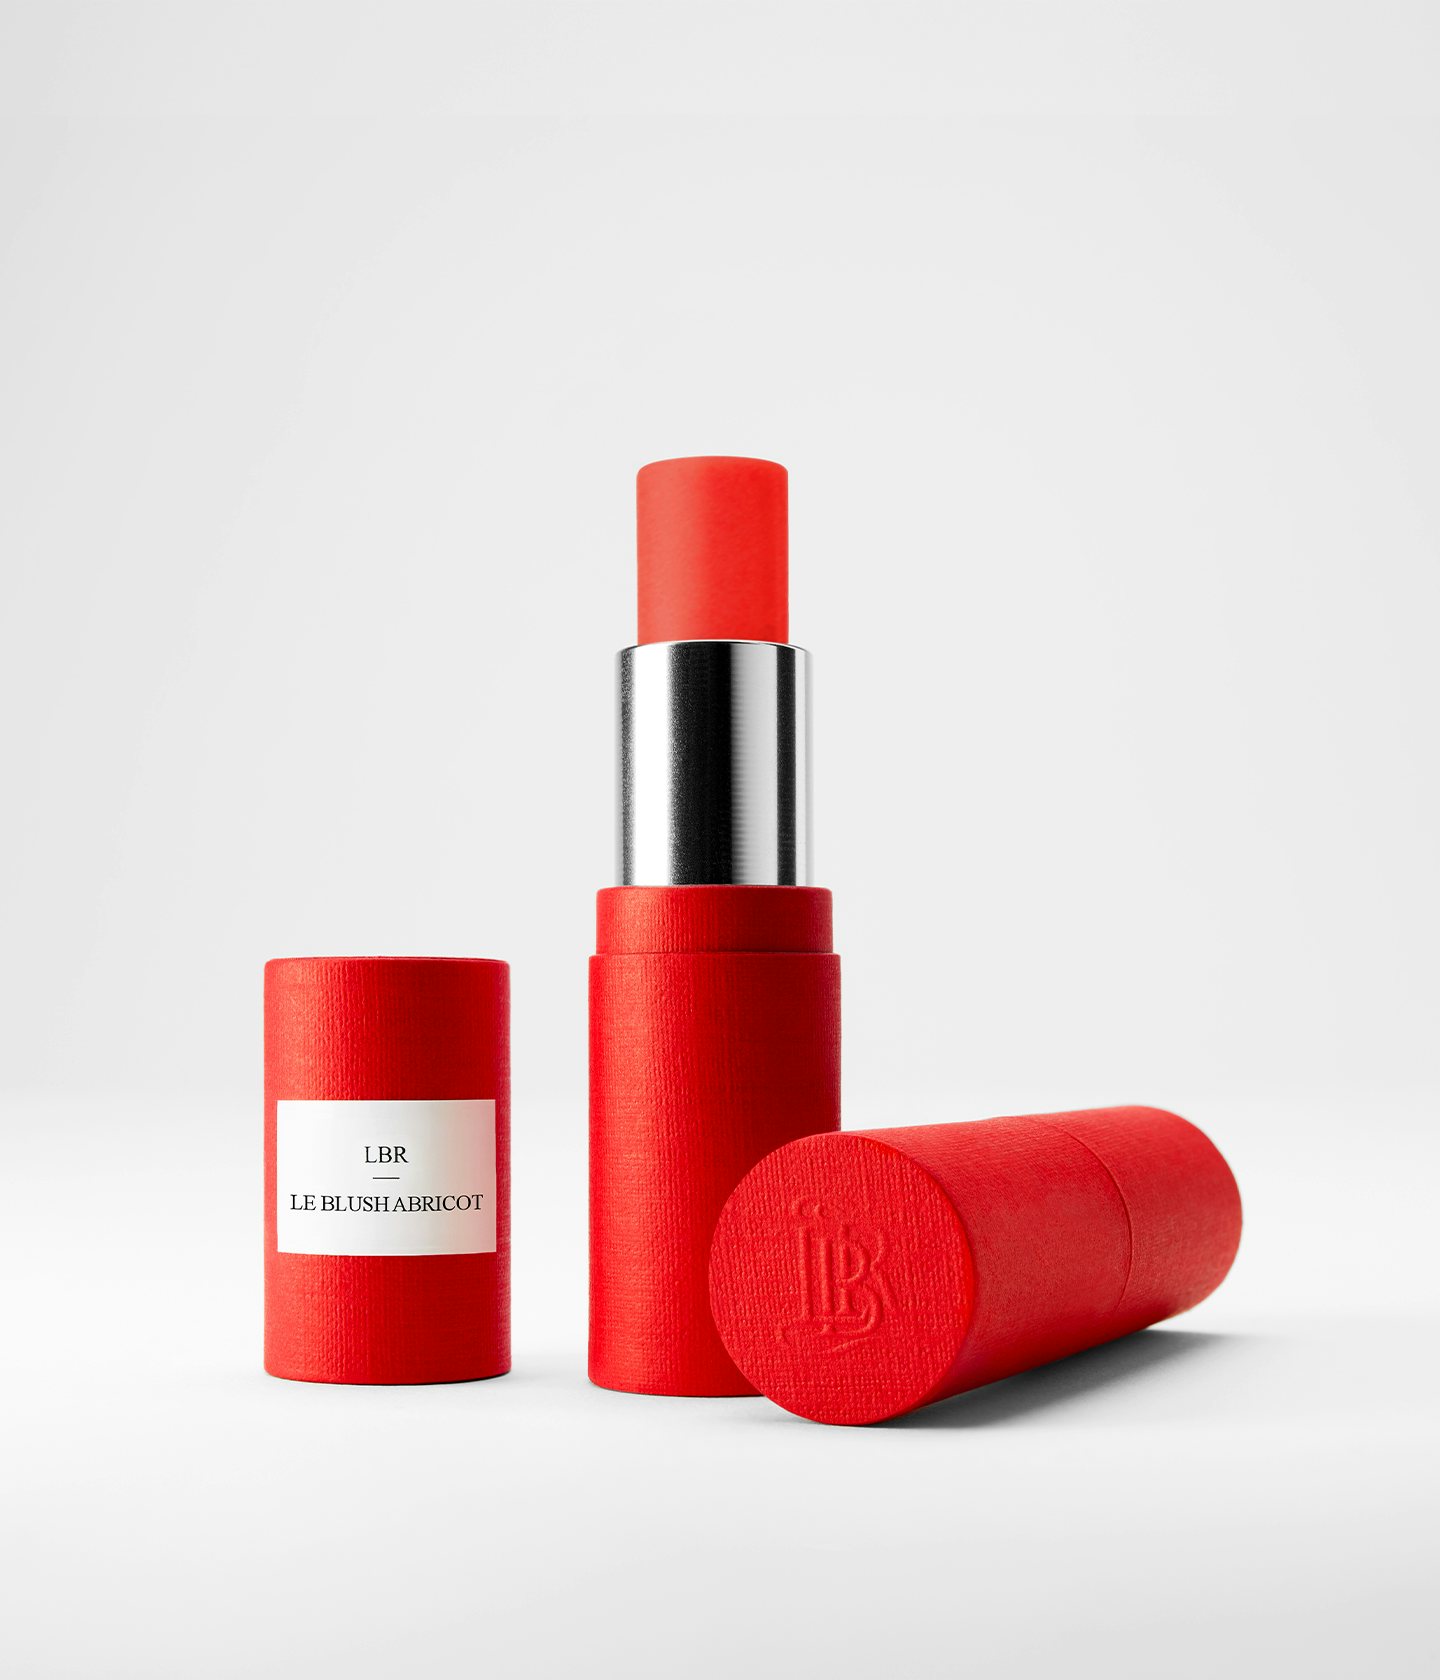 La bouche rouge The Apricot Blush in the red paper case